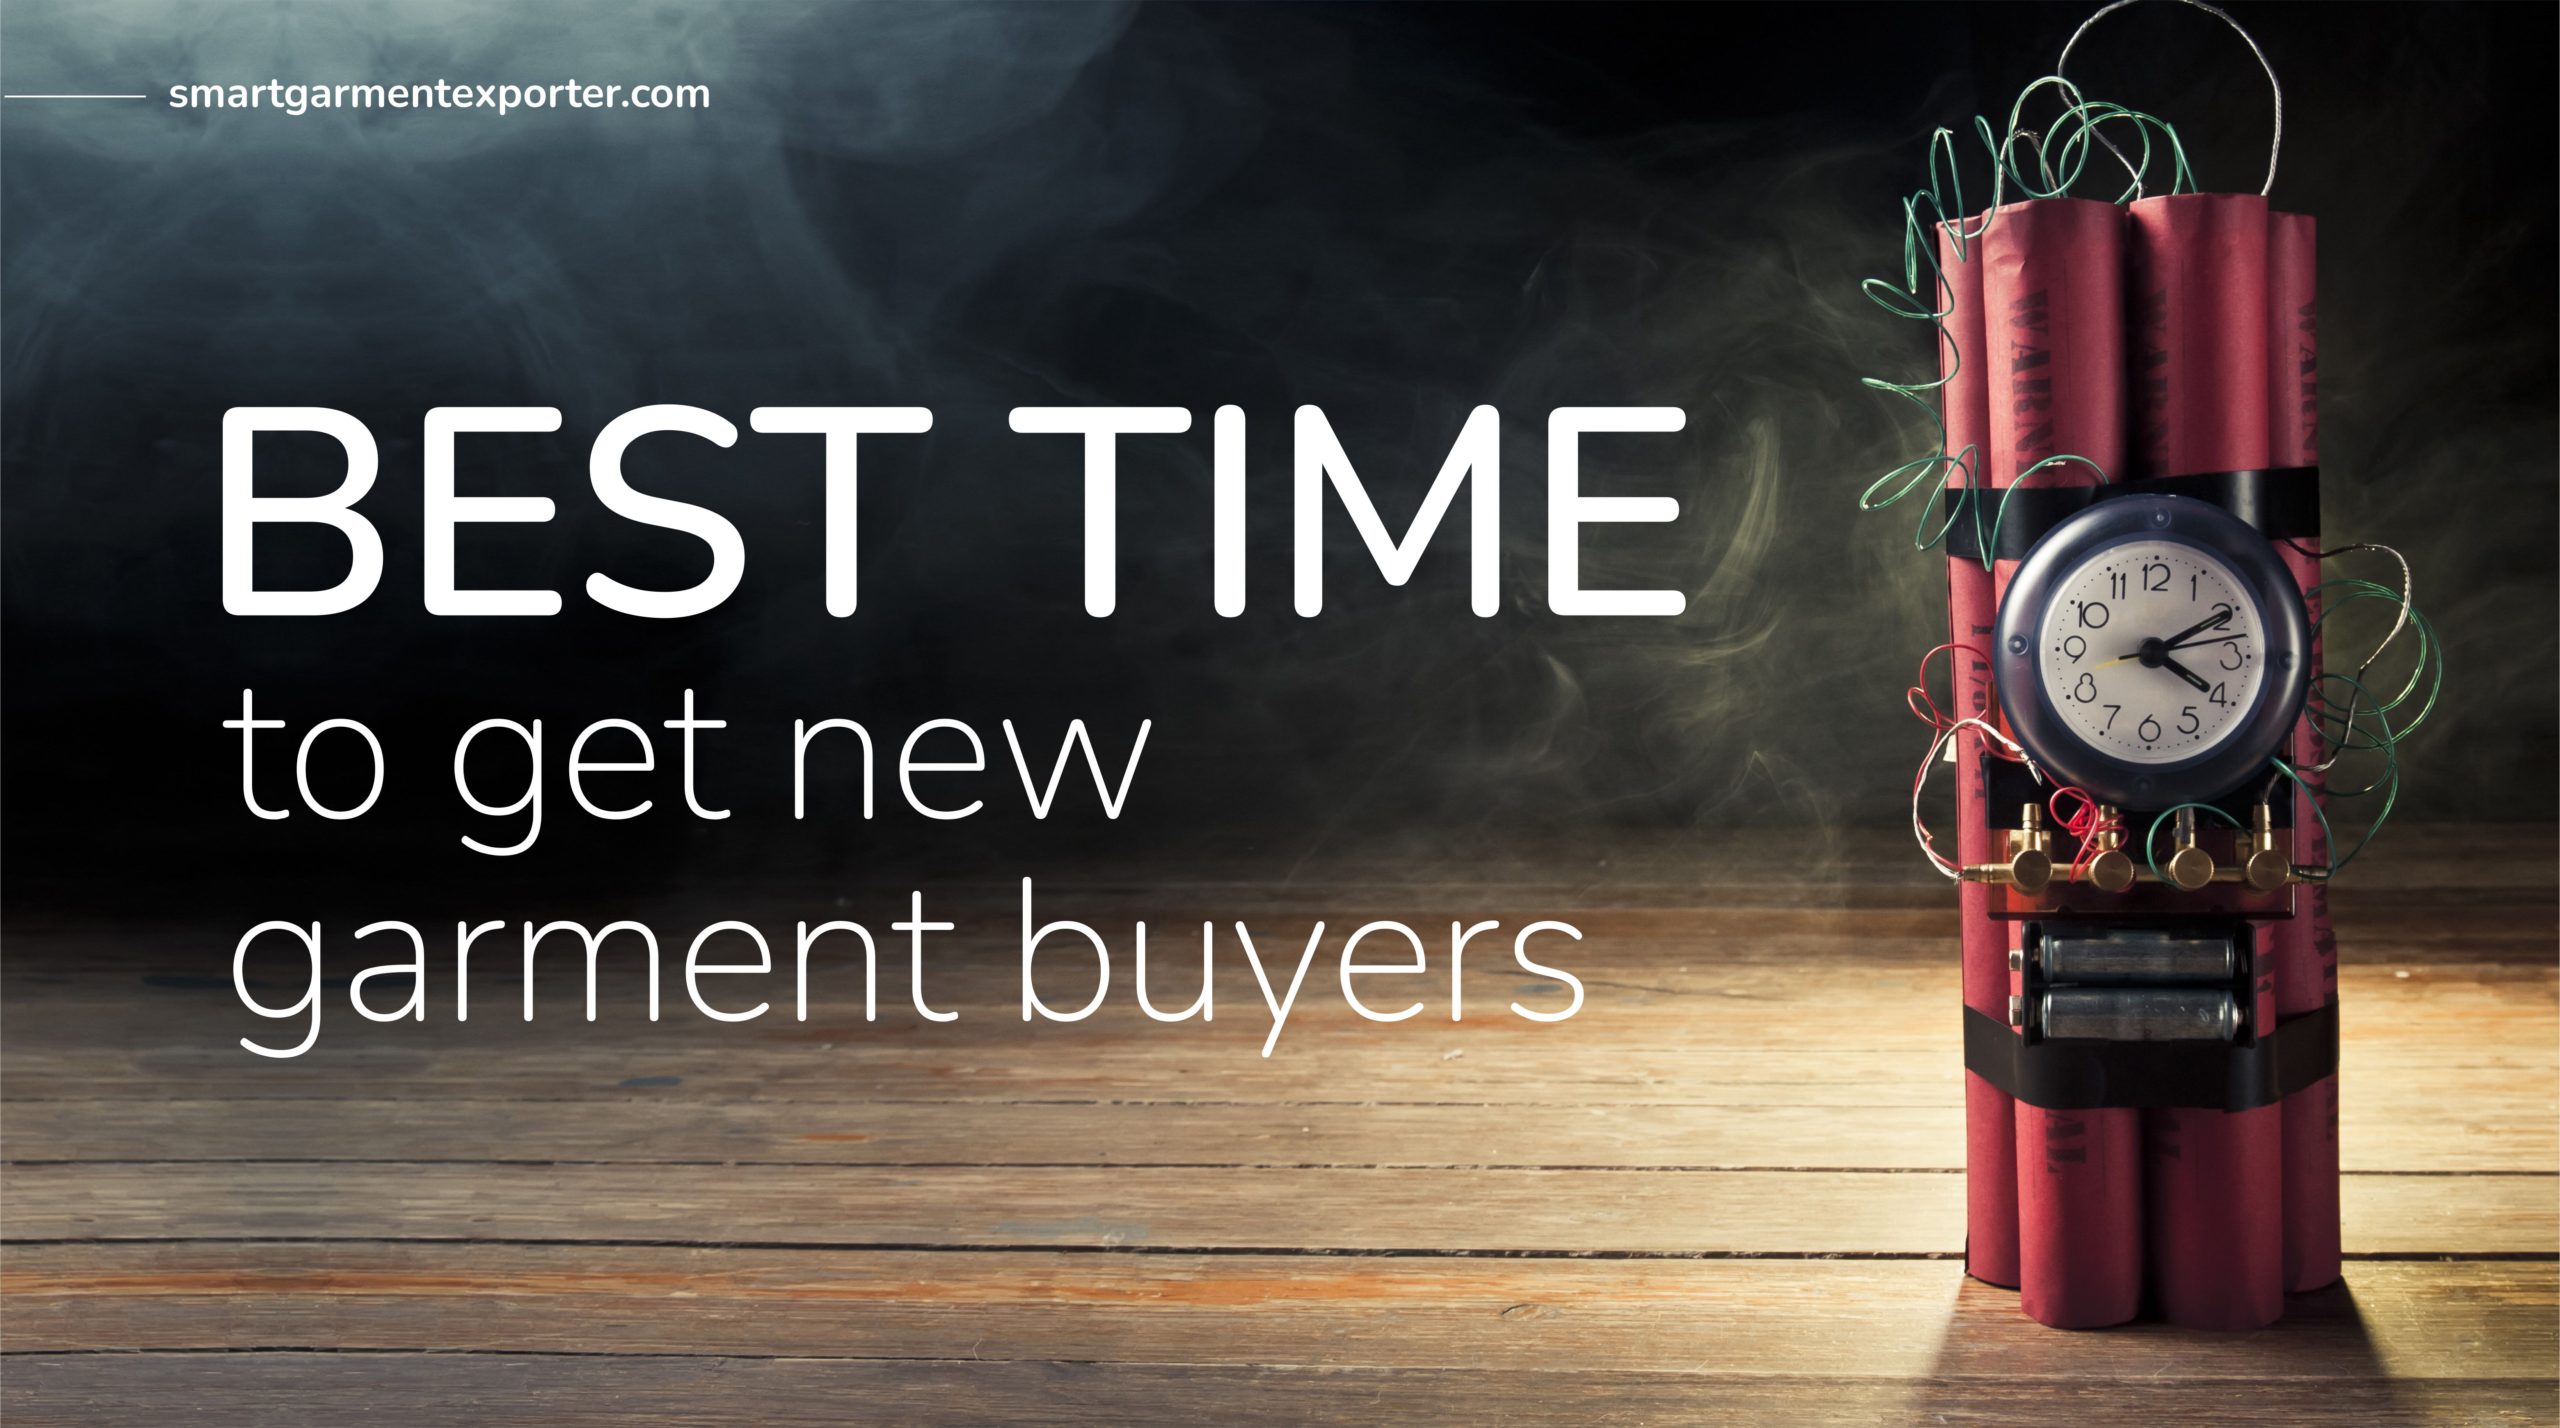 The best time to get new garment buyers